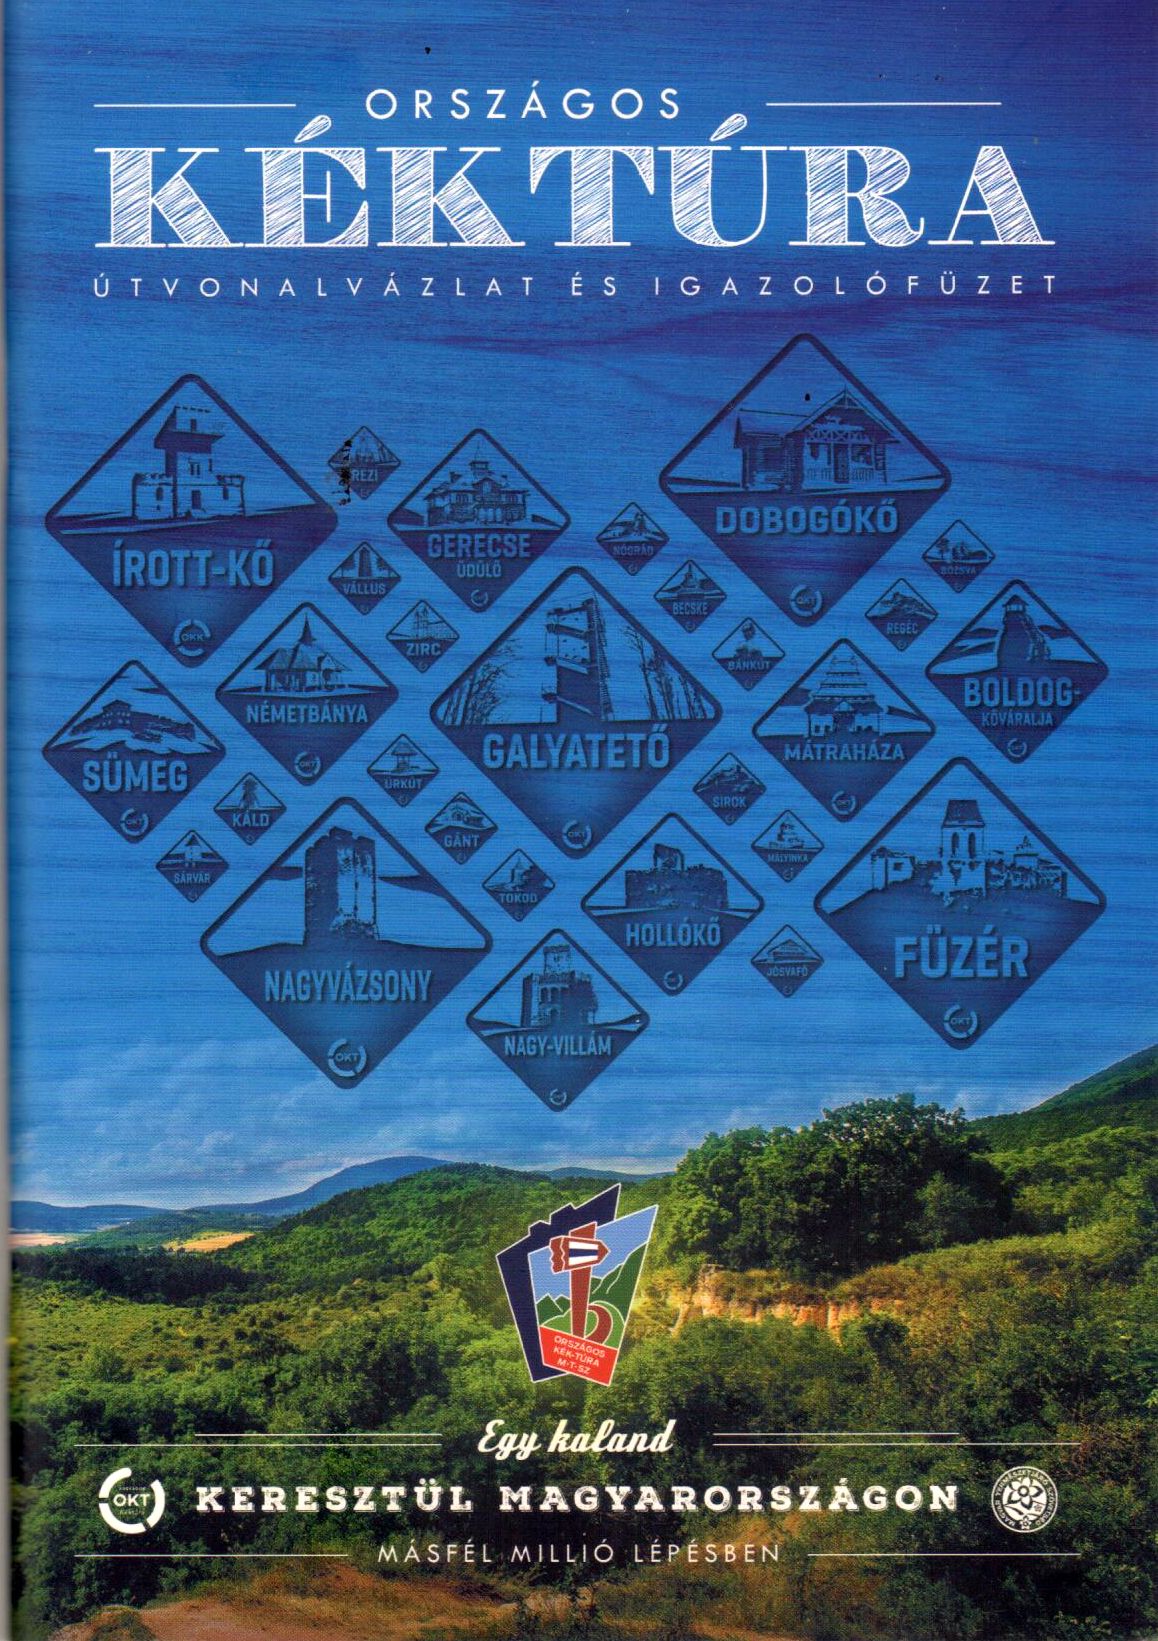 National (blue) hiking route control points with map sketches in Hungarian language